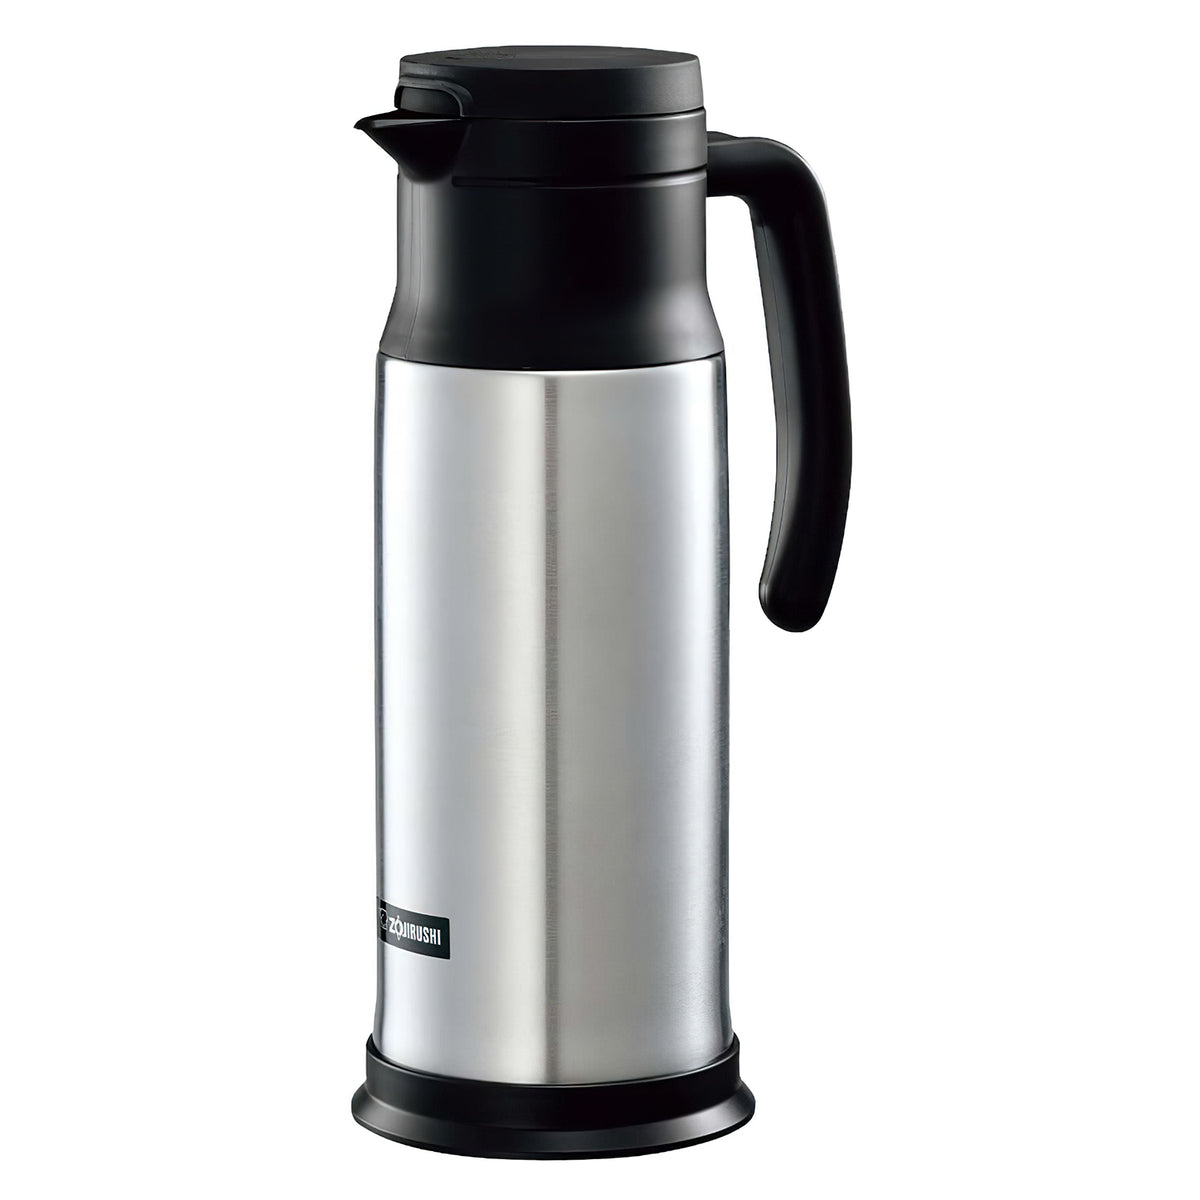 ZOJIRUSHI Stainless Steel Water Pitcher 1.0L